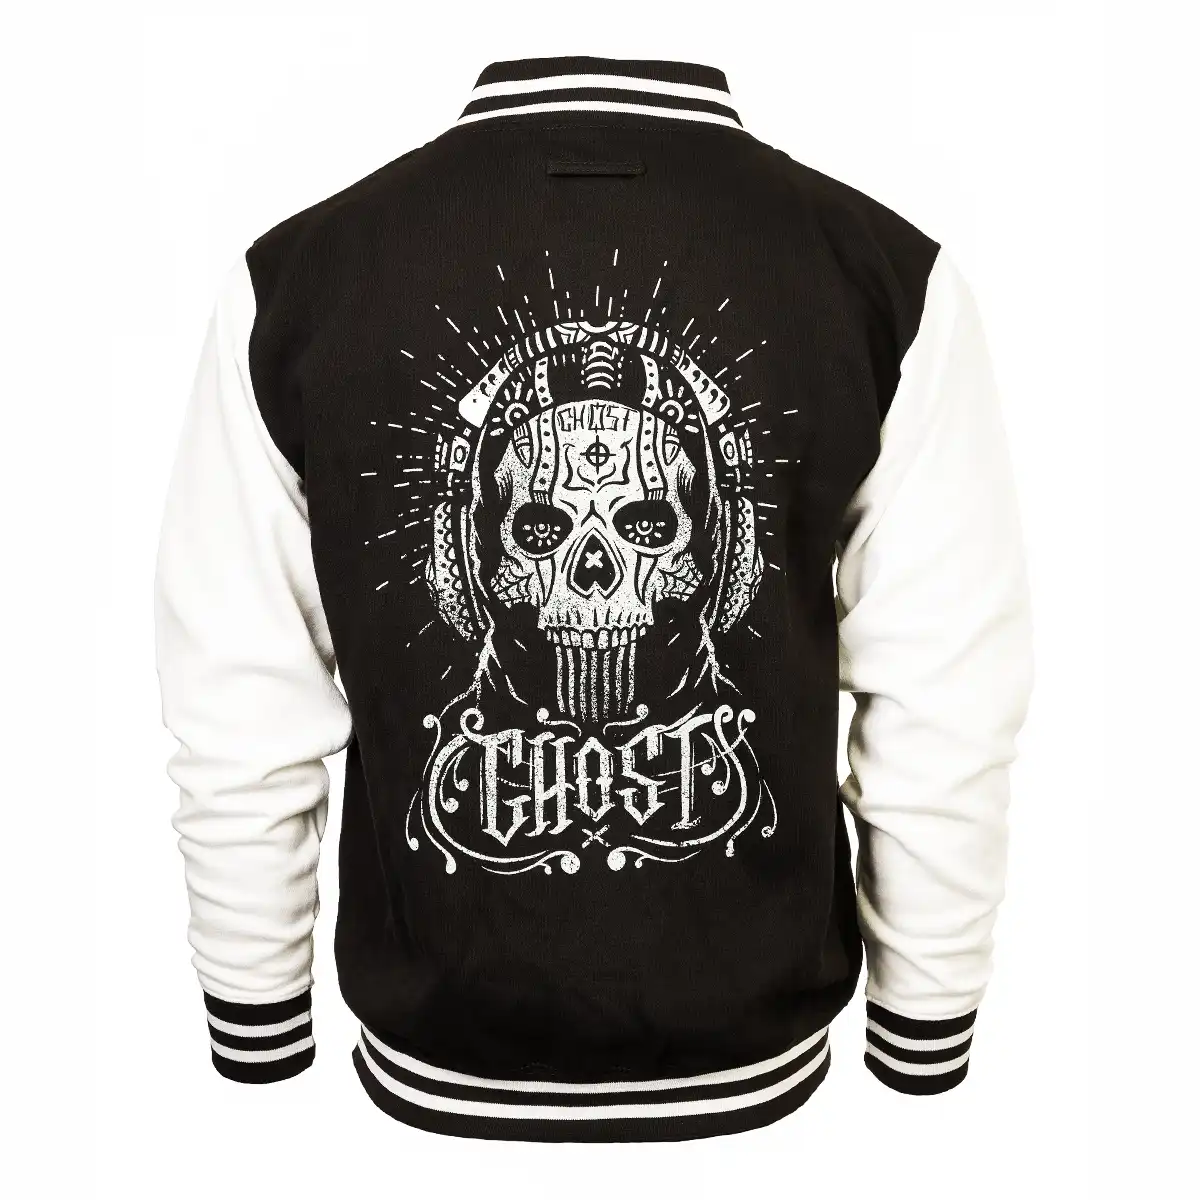 Call of Duty College Jacket "Ghost" Black/White XL Image 2